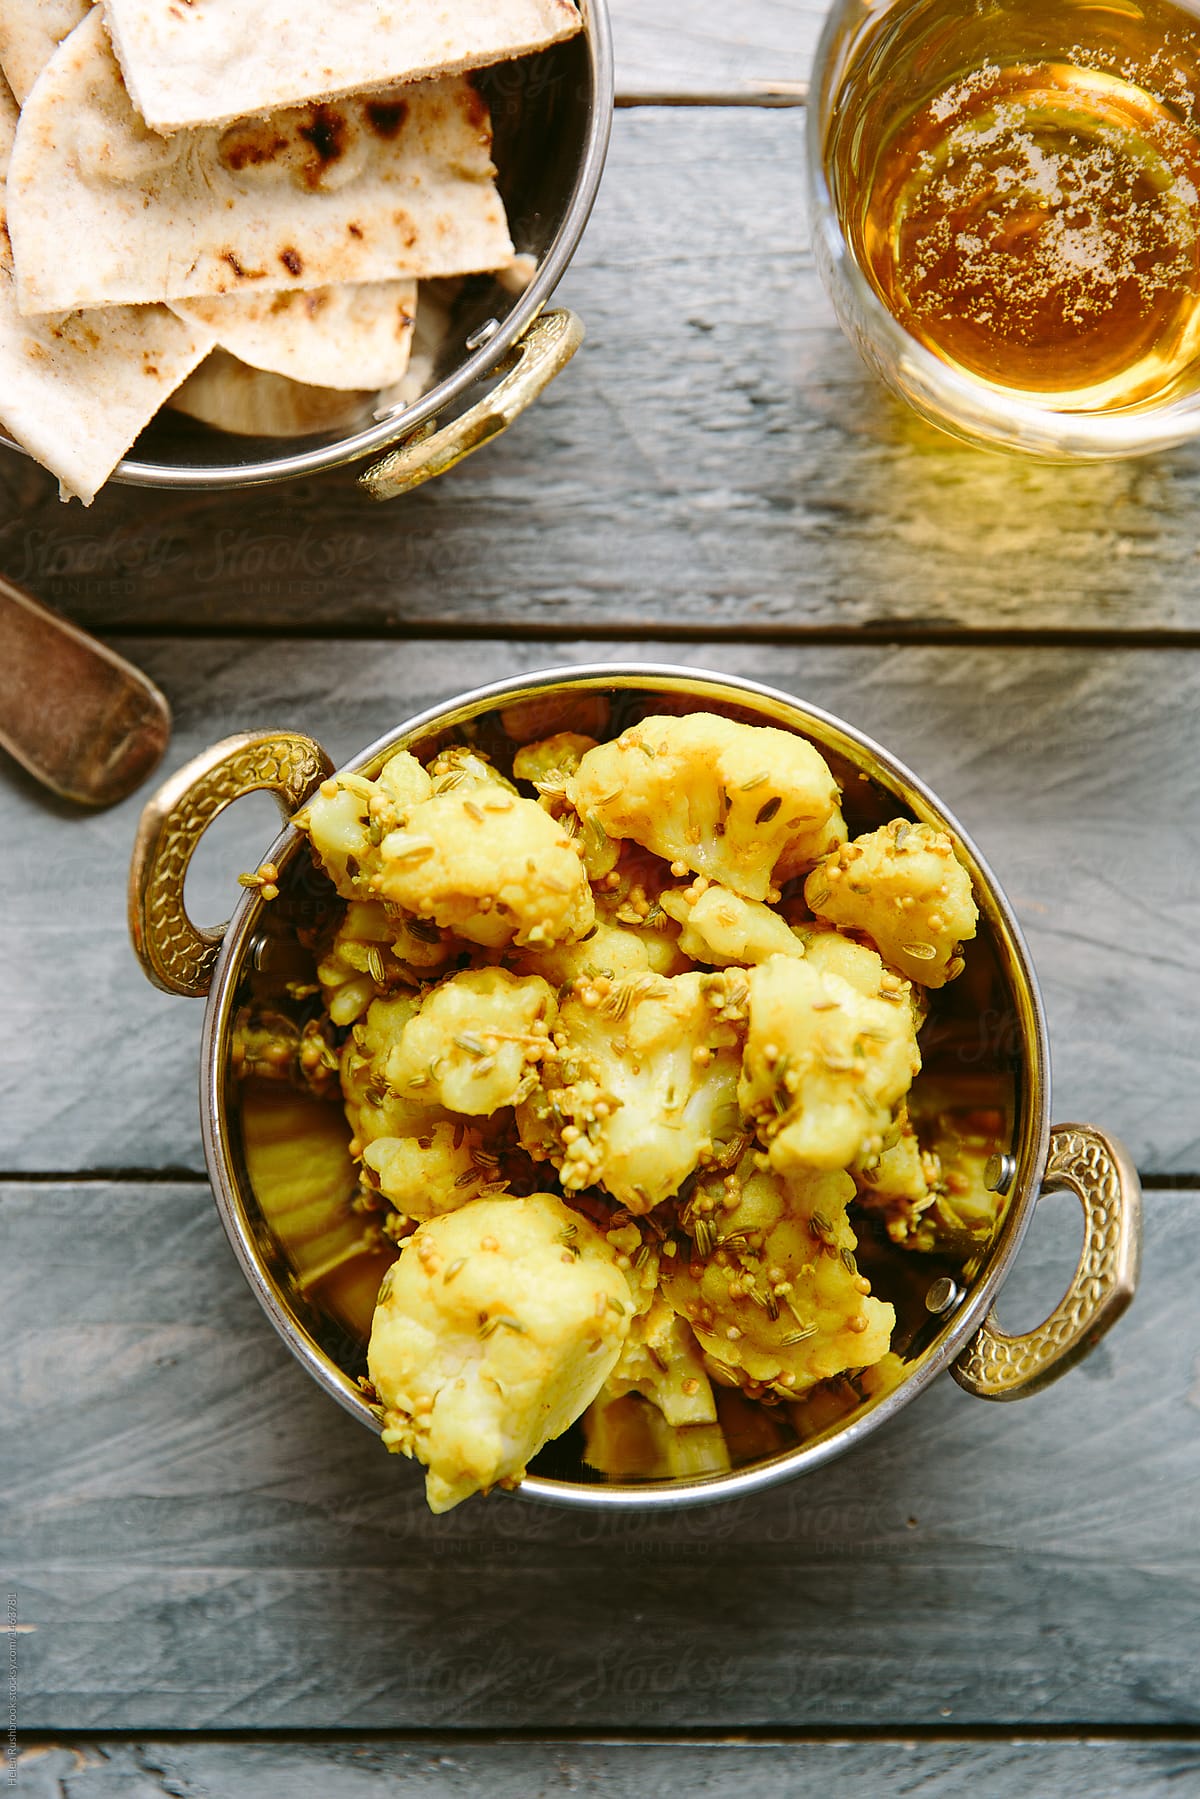 An indian dish of cauliflower cooked with whole spices